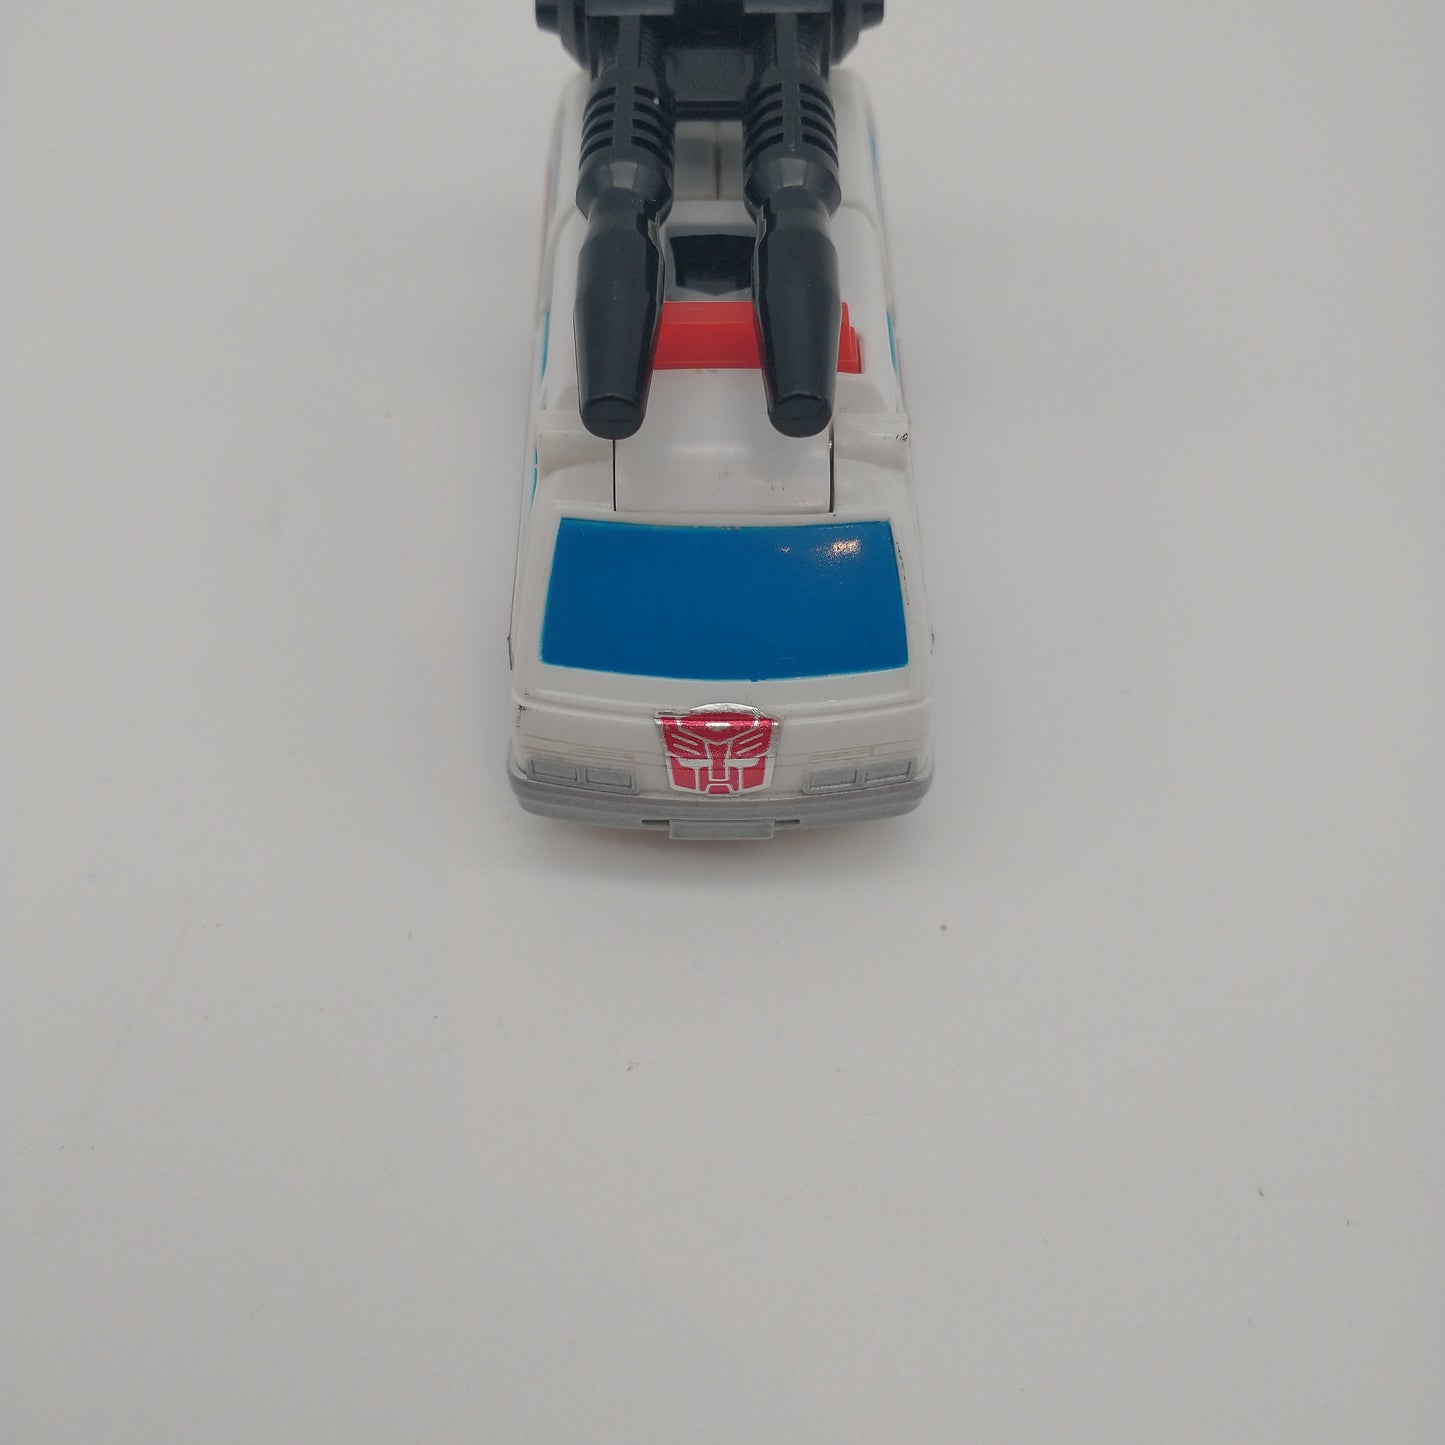 Transformers First Aid (G1) 1987 Hasbro Loose, 100% Complete W/Tech Specs